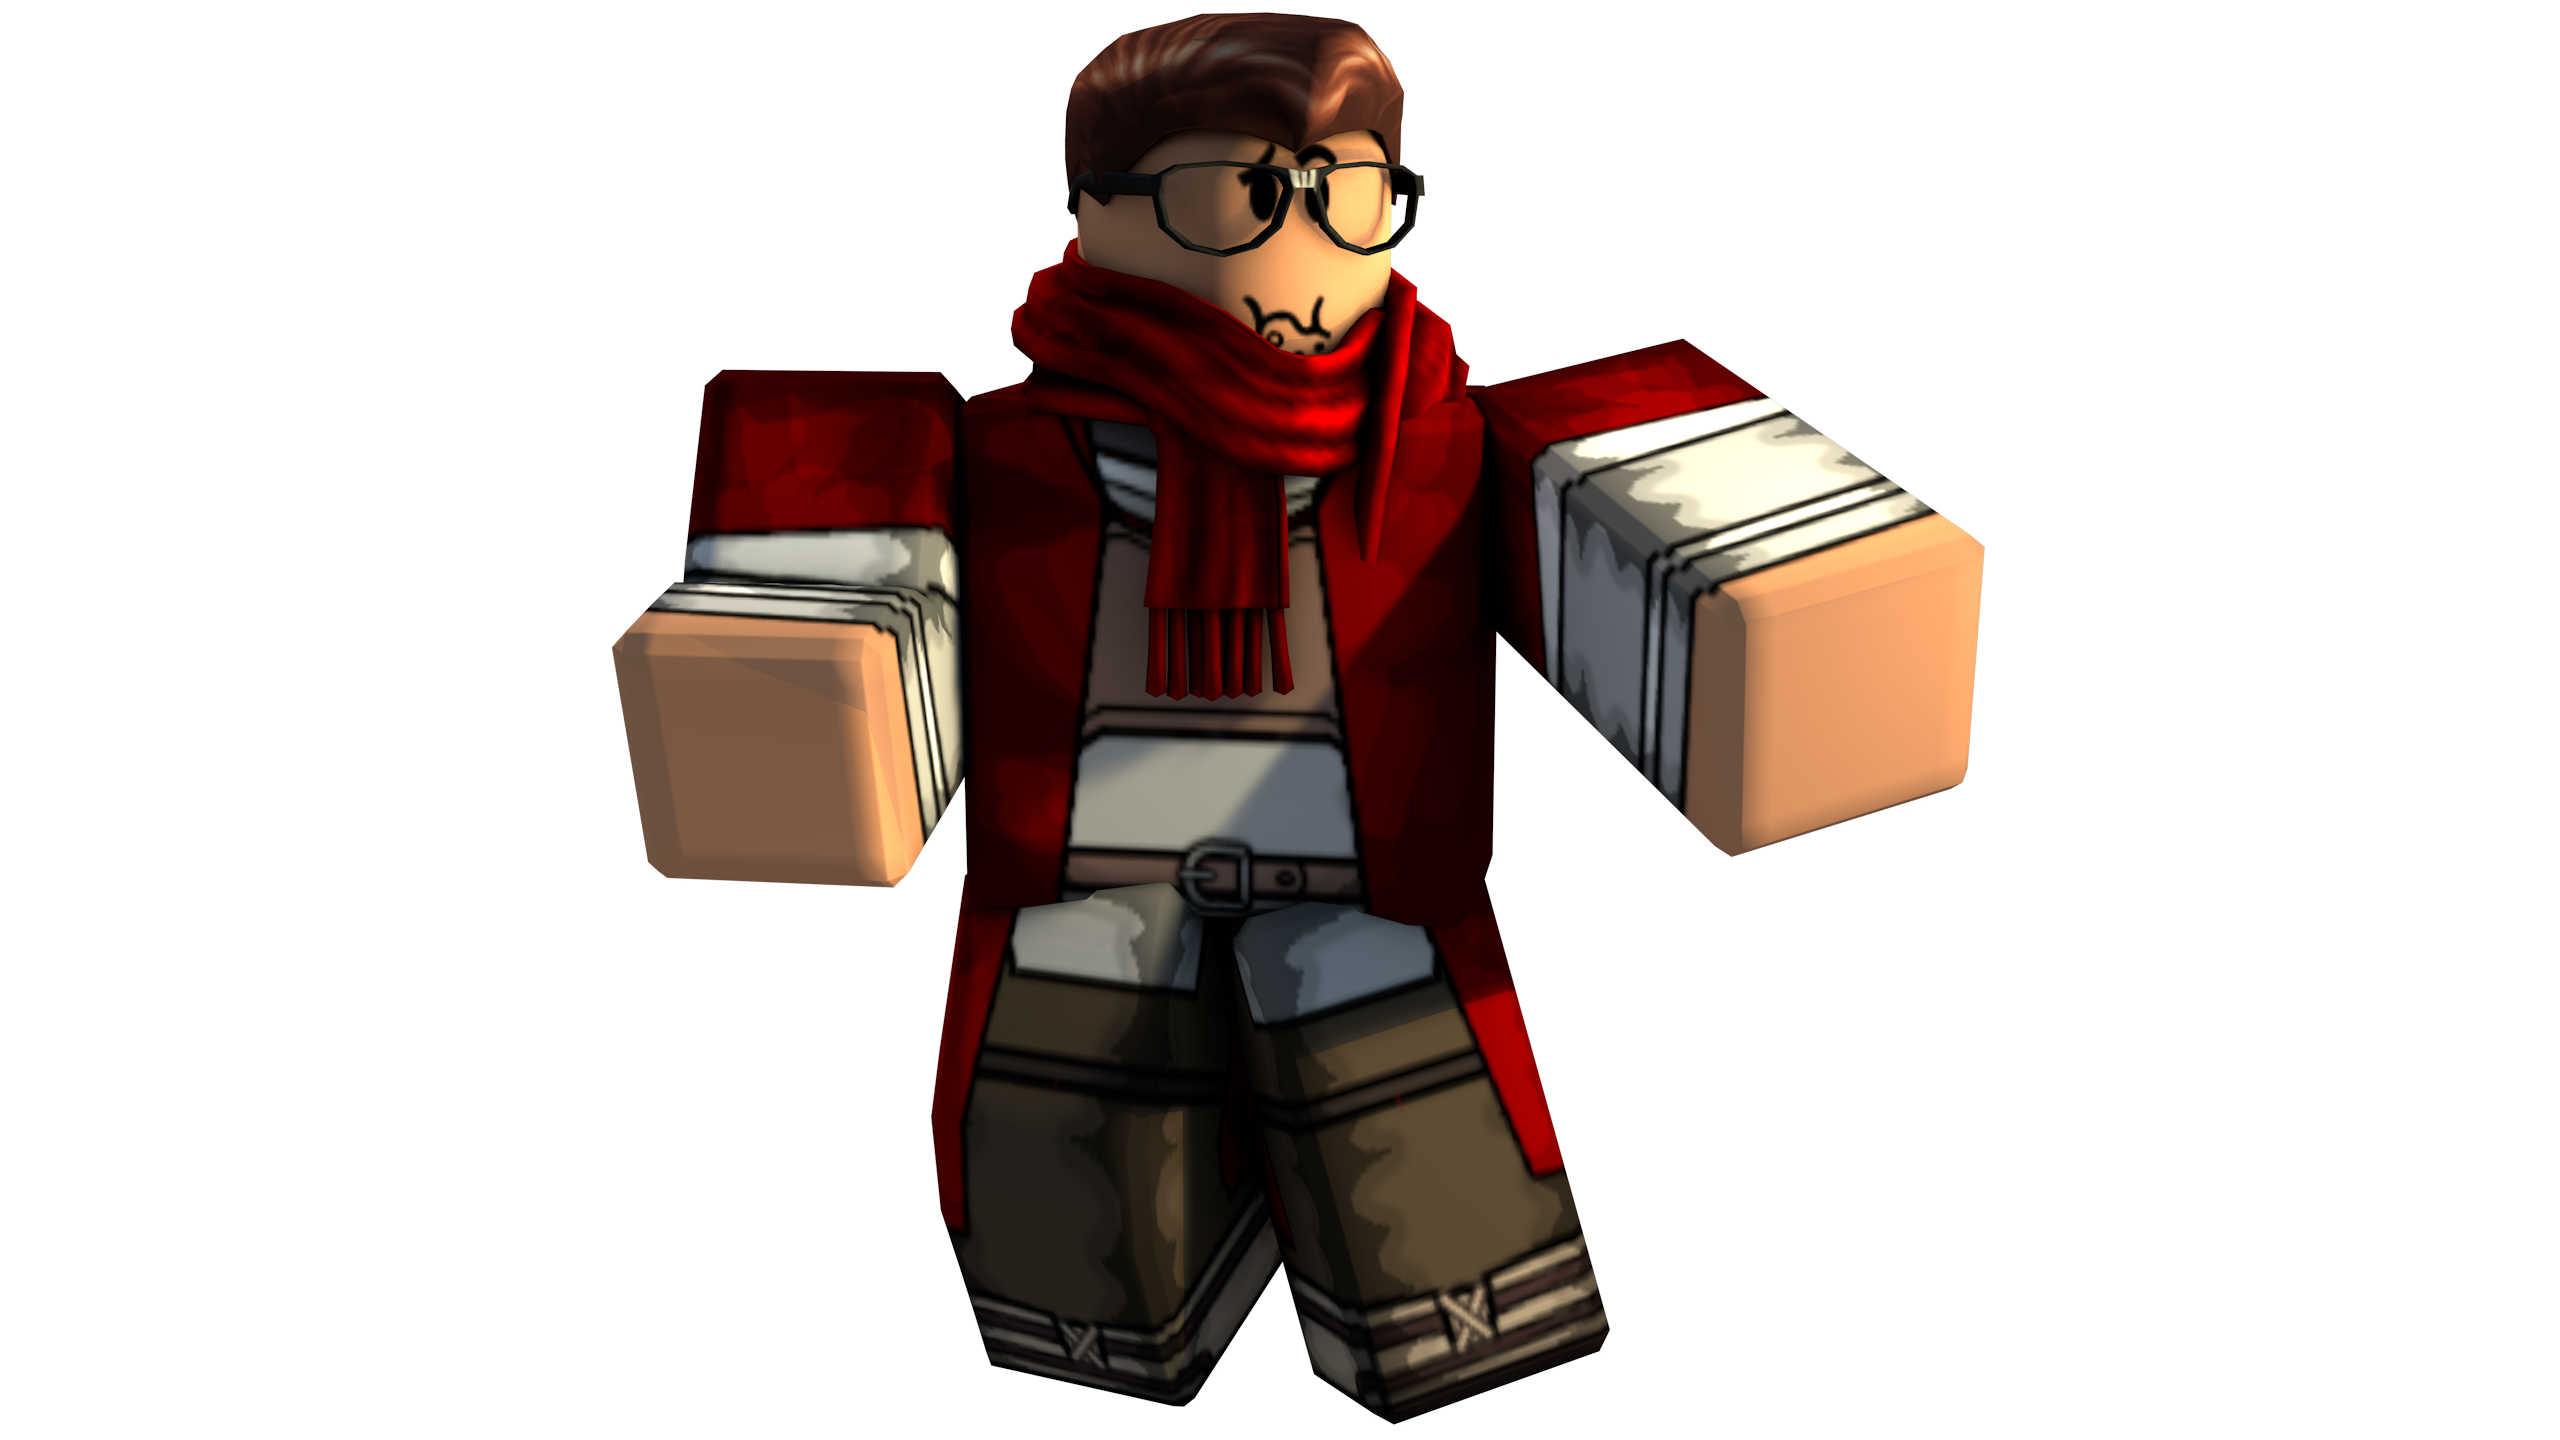 Roblox GFX #2 by PhyreTheDesigner on DeviantArt